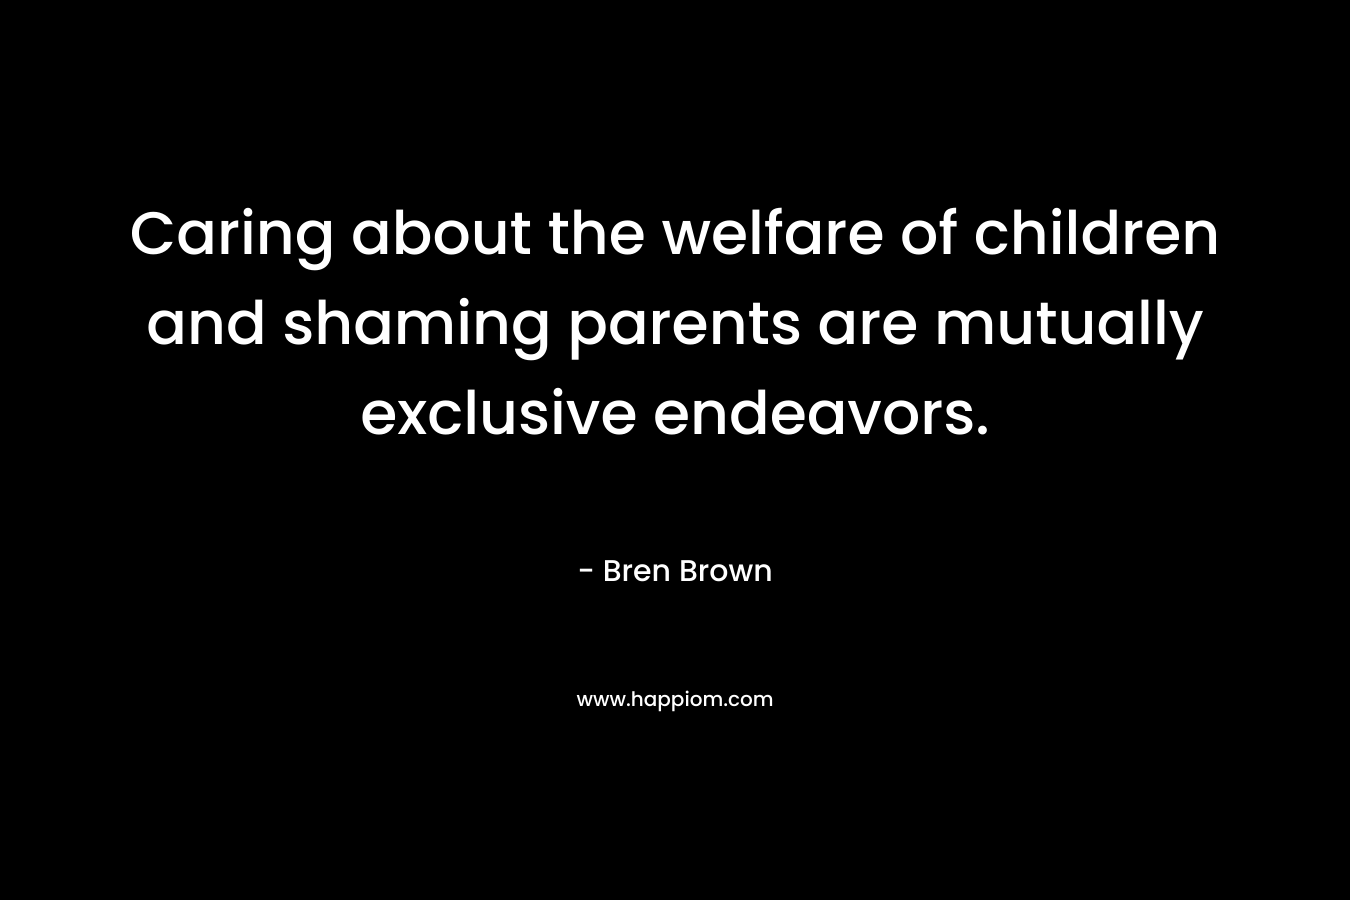 Caring about the welfare of children and shaming parents are mutually exclusive endeavors. – Bren Brown